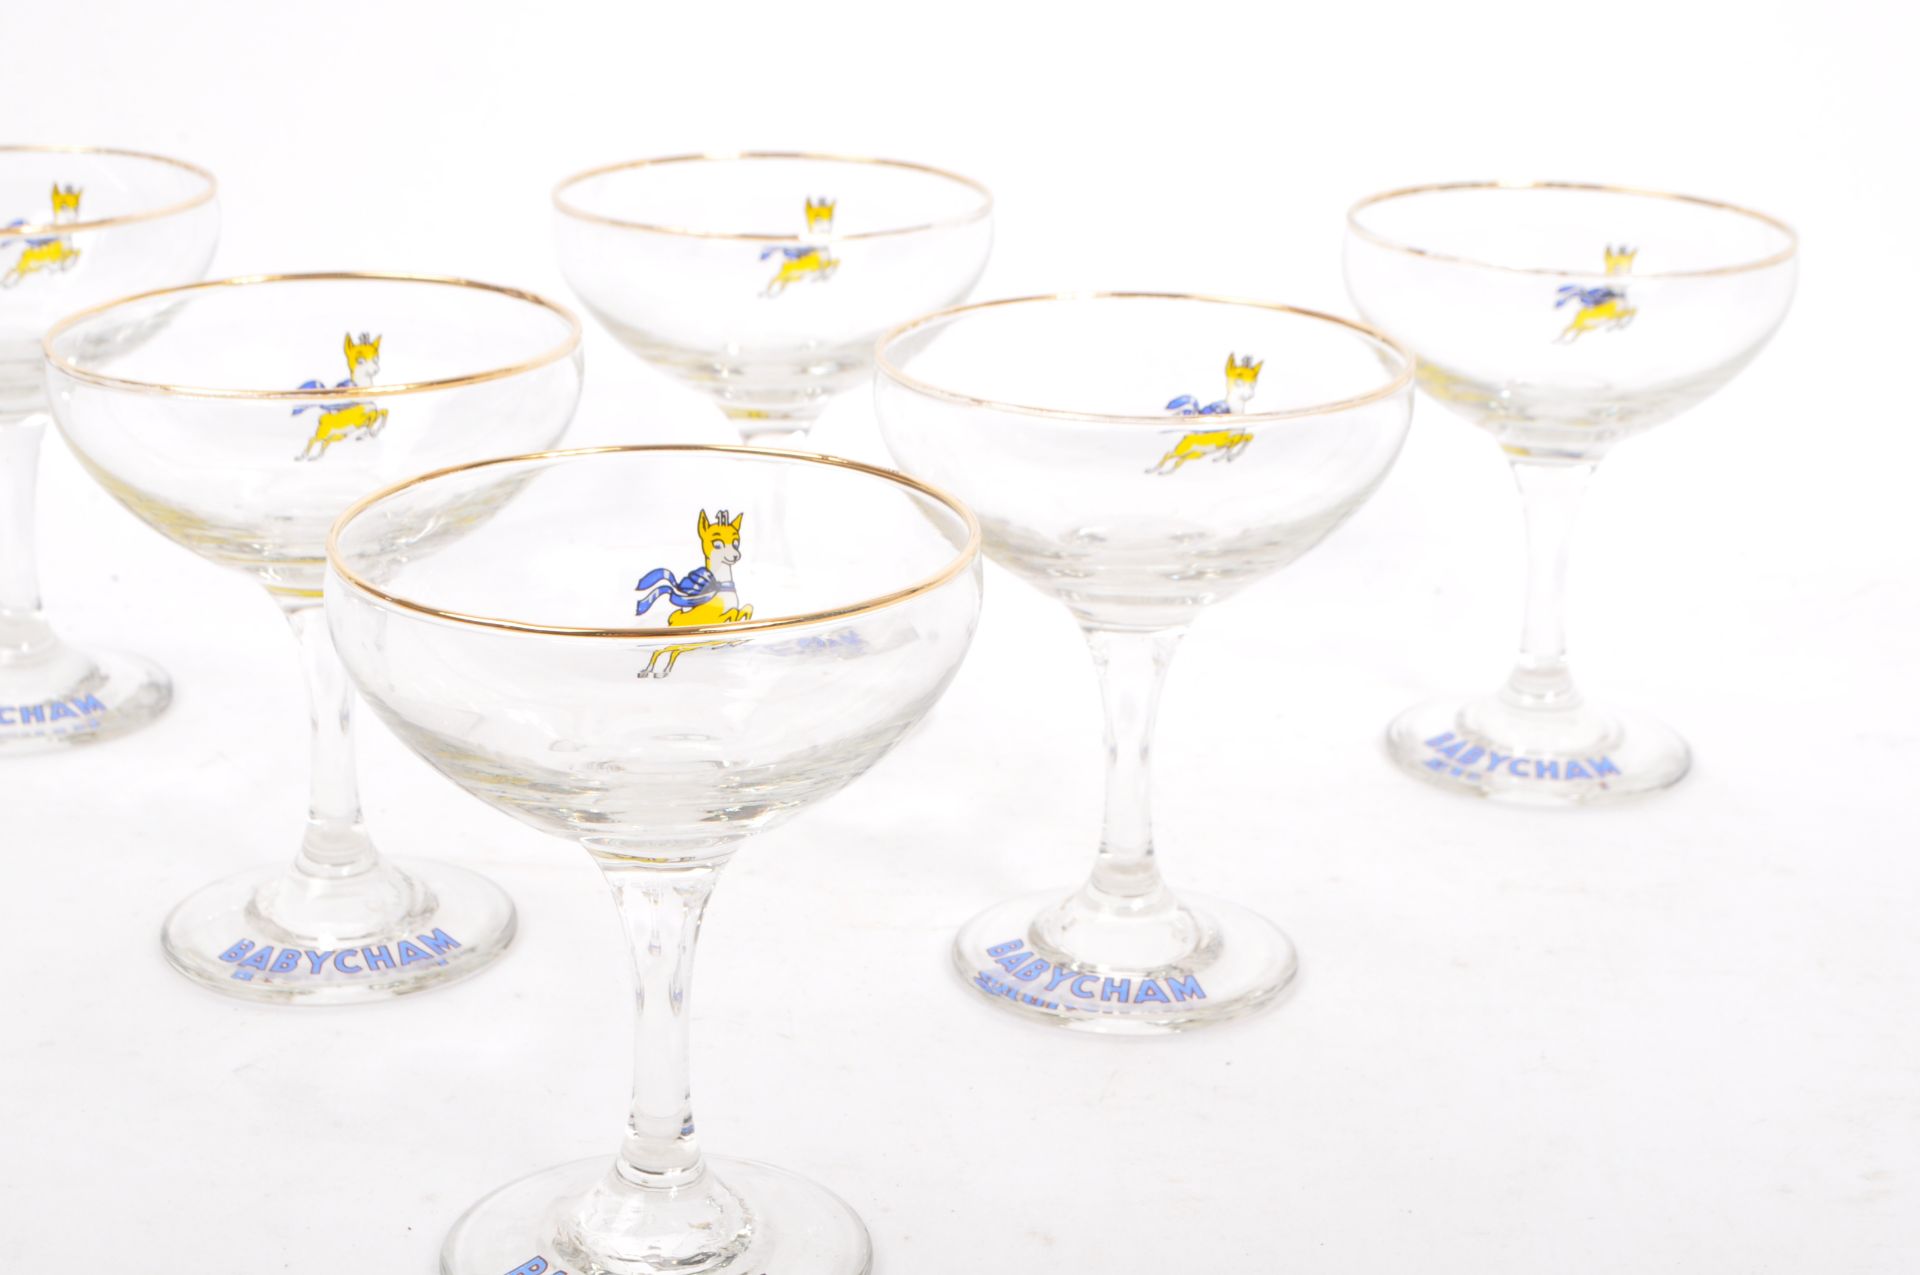 SIX VINTAGE BABYCHAM COCKTAIL COUPE GLASSES - Image 2 of 5